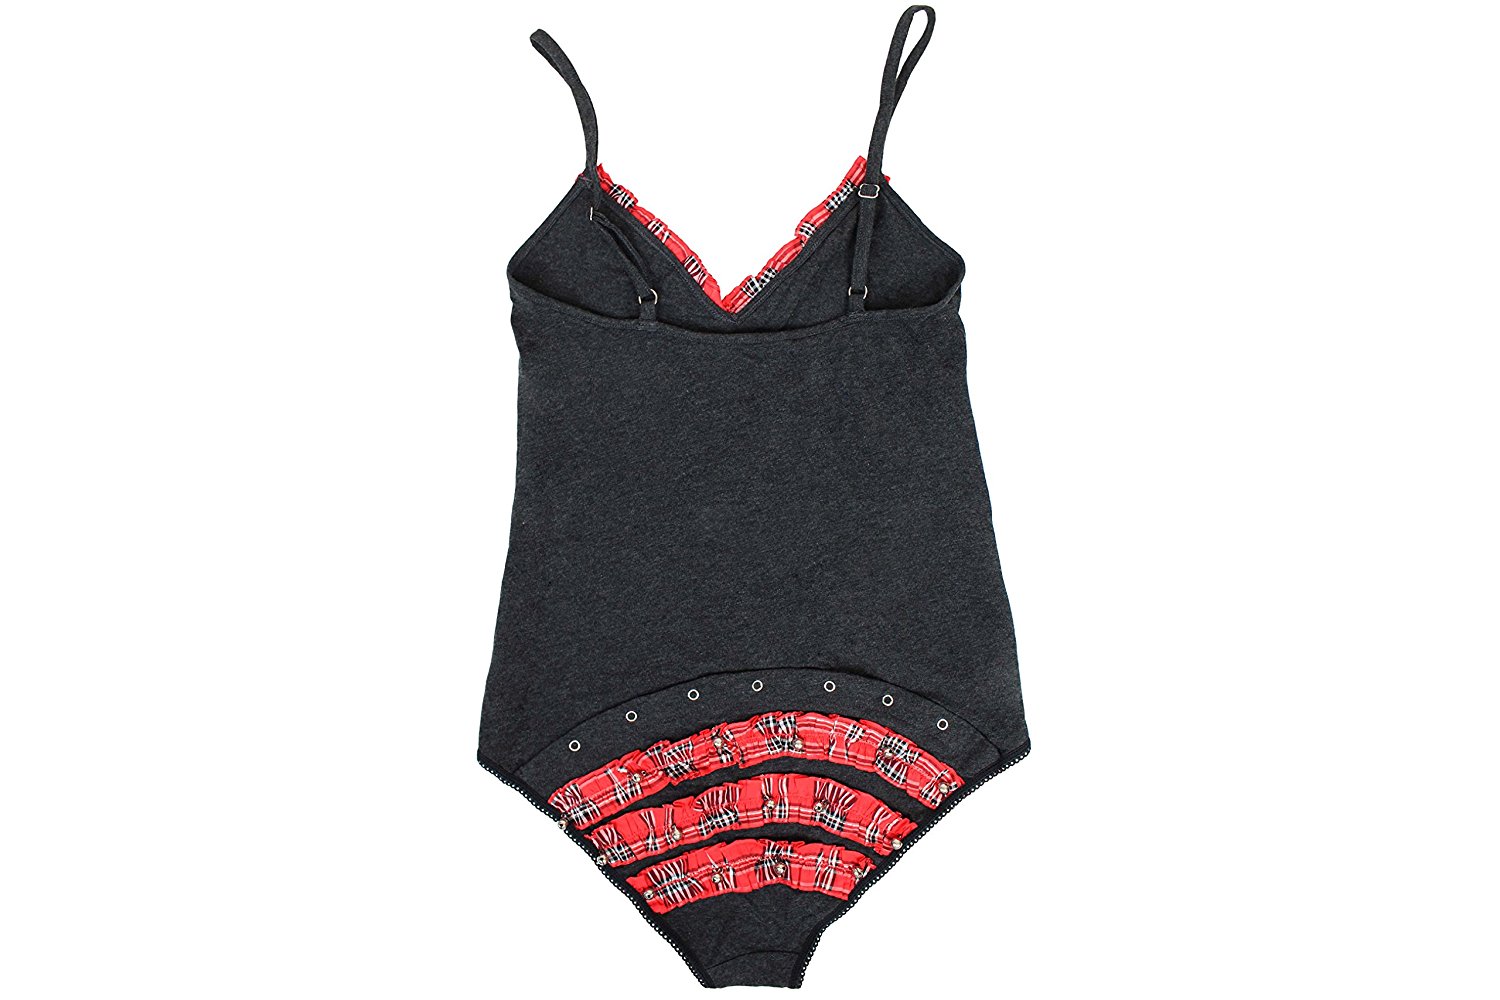 Victoria's Secret Sexy Holiday Gray Plaid Cotton Jingle Bell Teddy Bodysuit - image 2 of 2